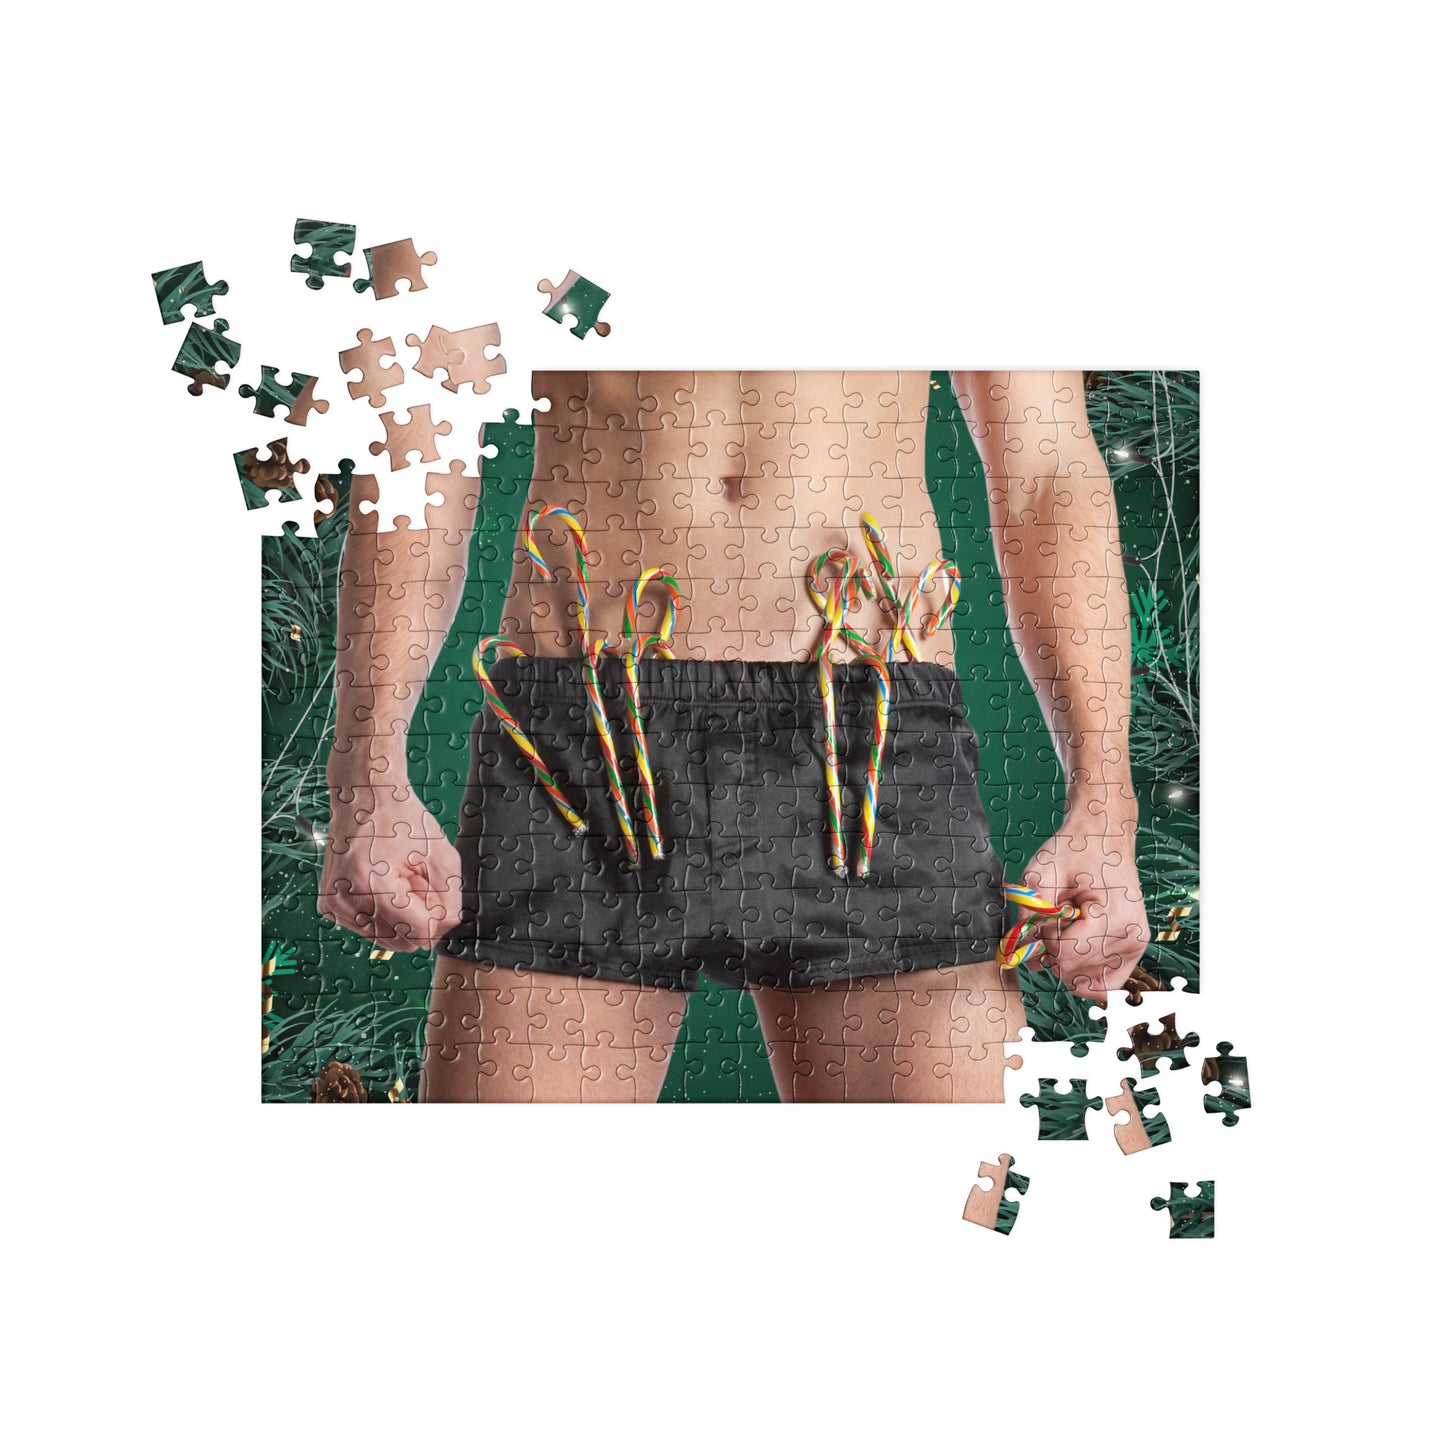 Sensual Jigsaw Puzzle: Man with Candy Canes